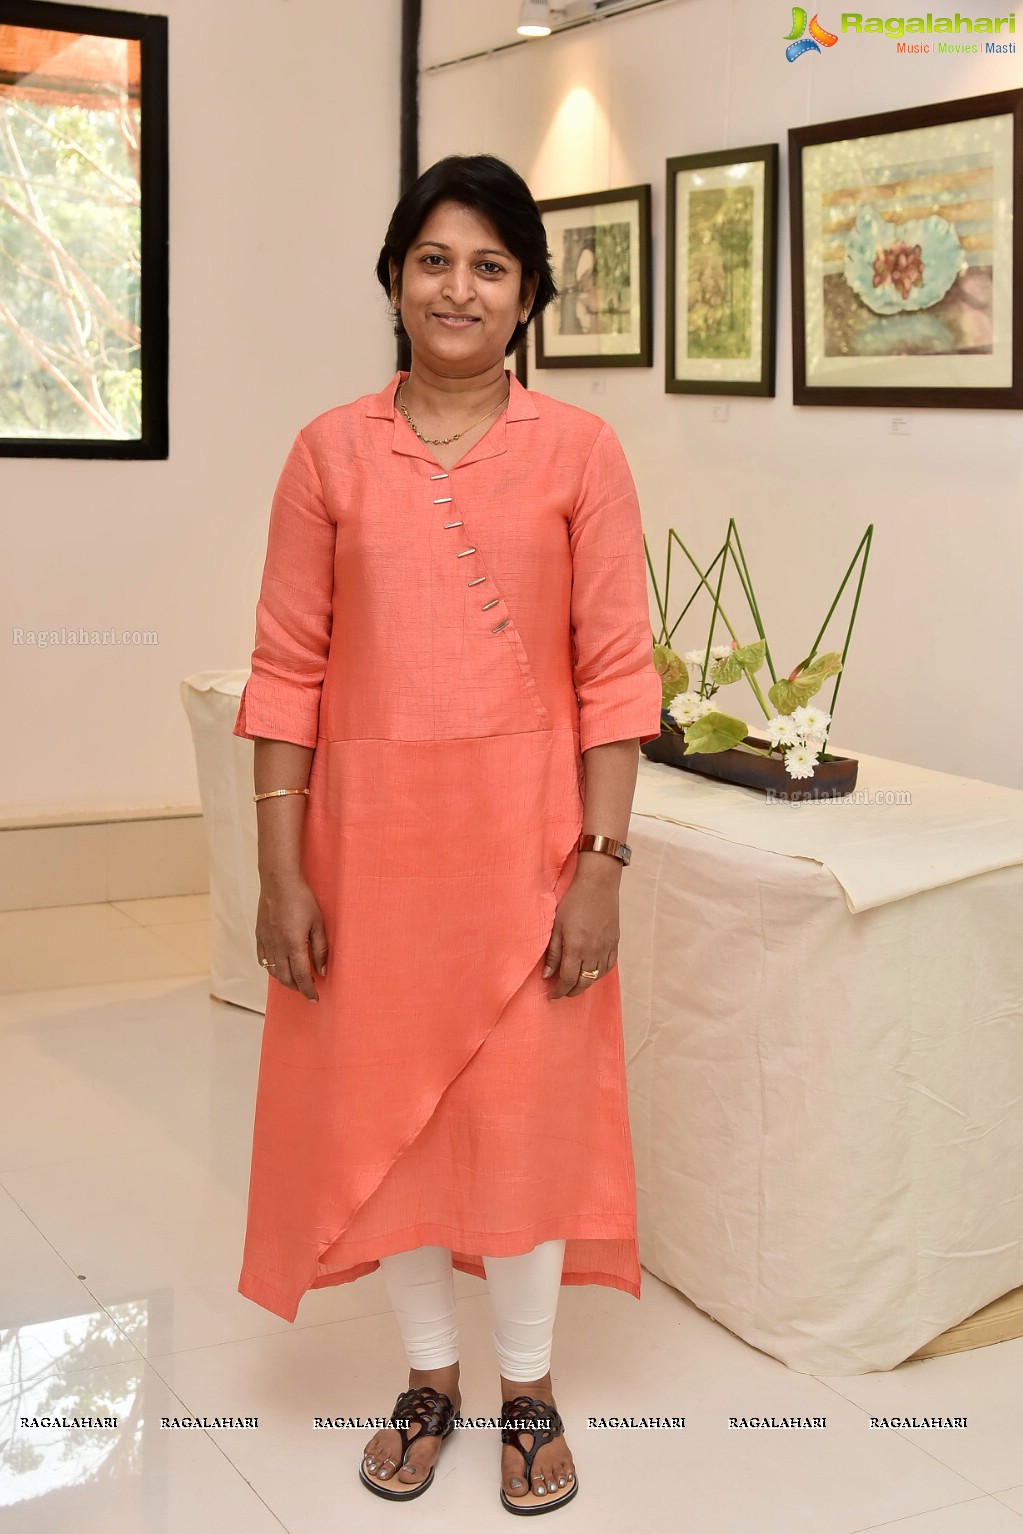 Aura and Flora - An Ikebana and Water Color Painting Exhibition at Phoenix Arena Hitech City, Hyderabad